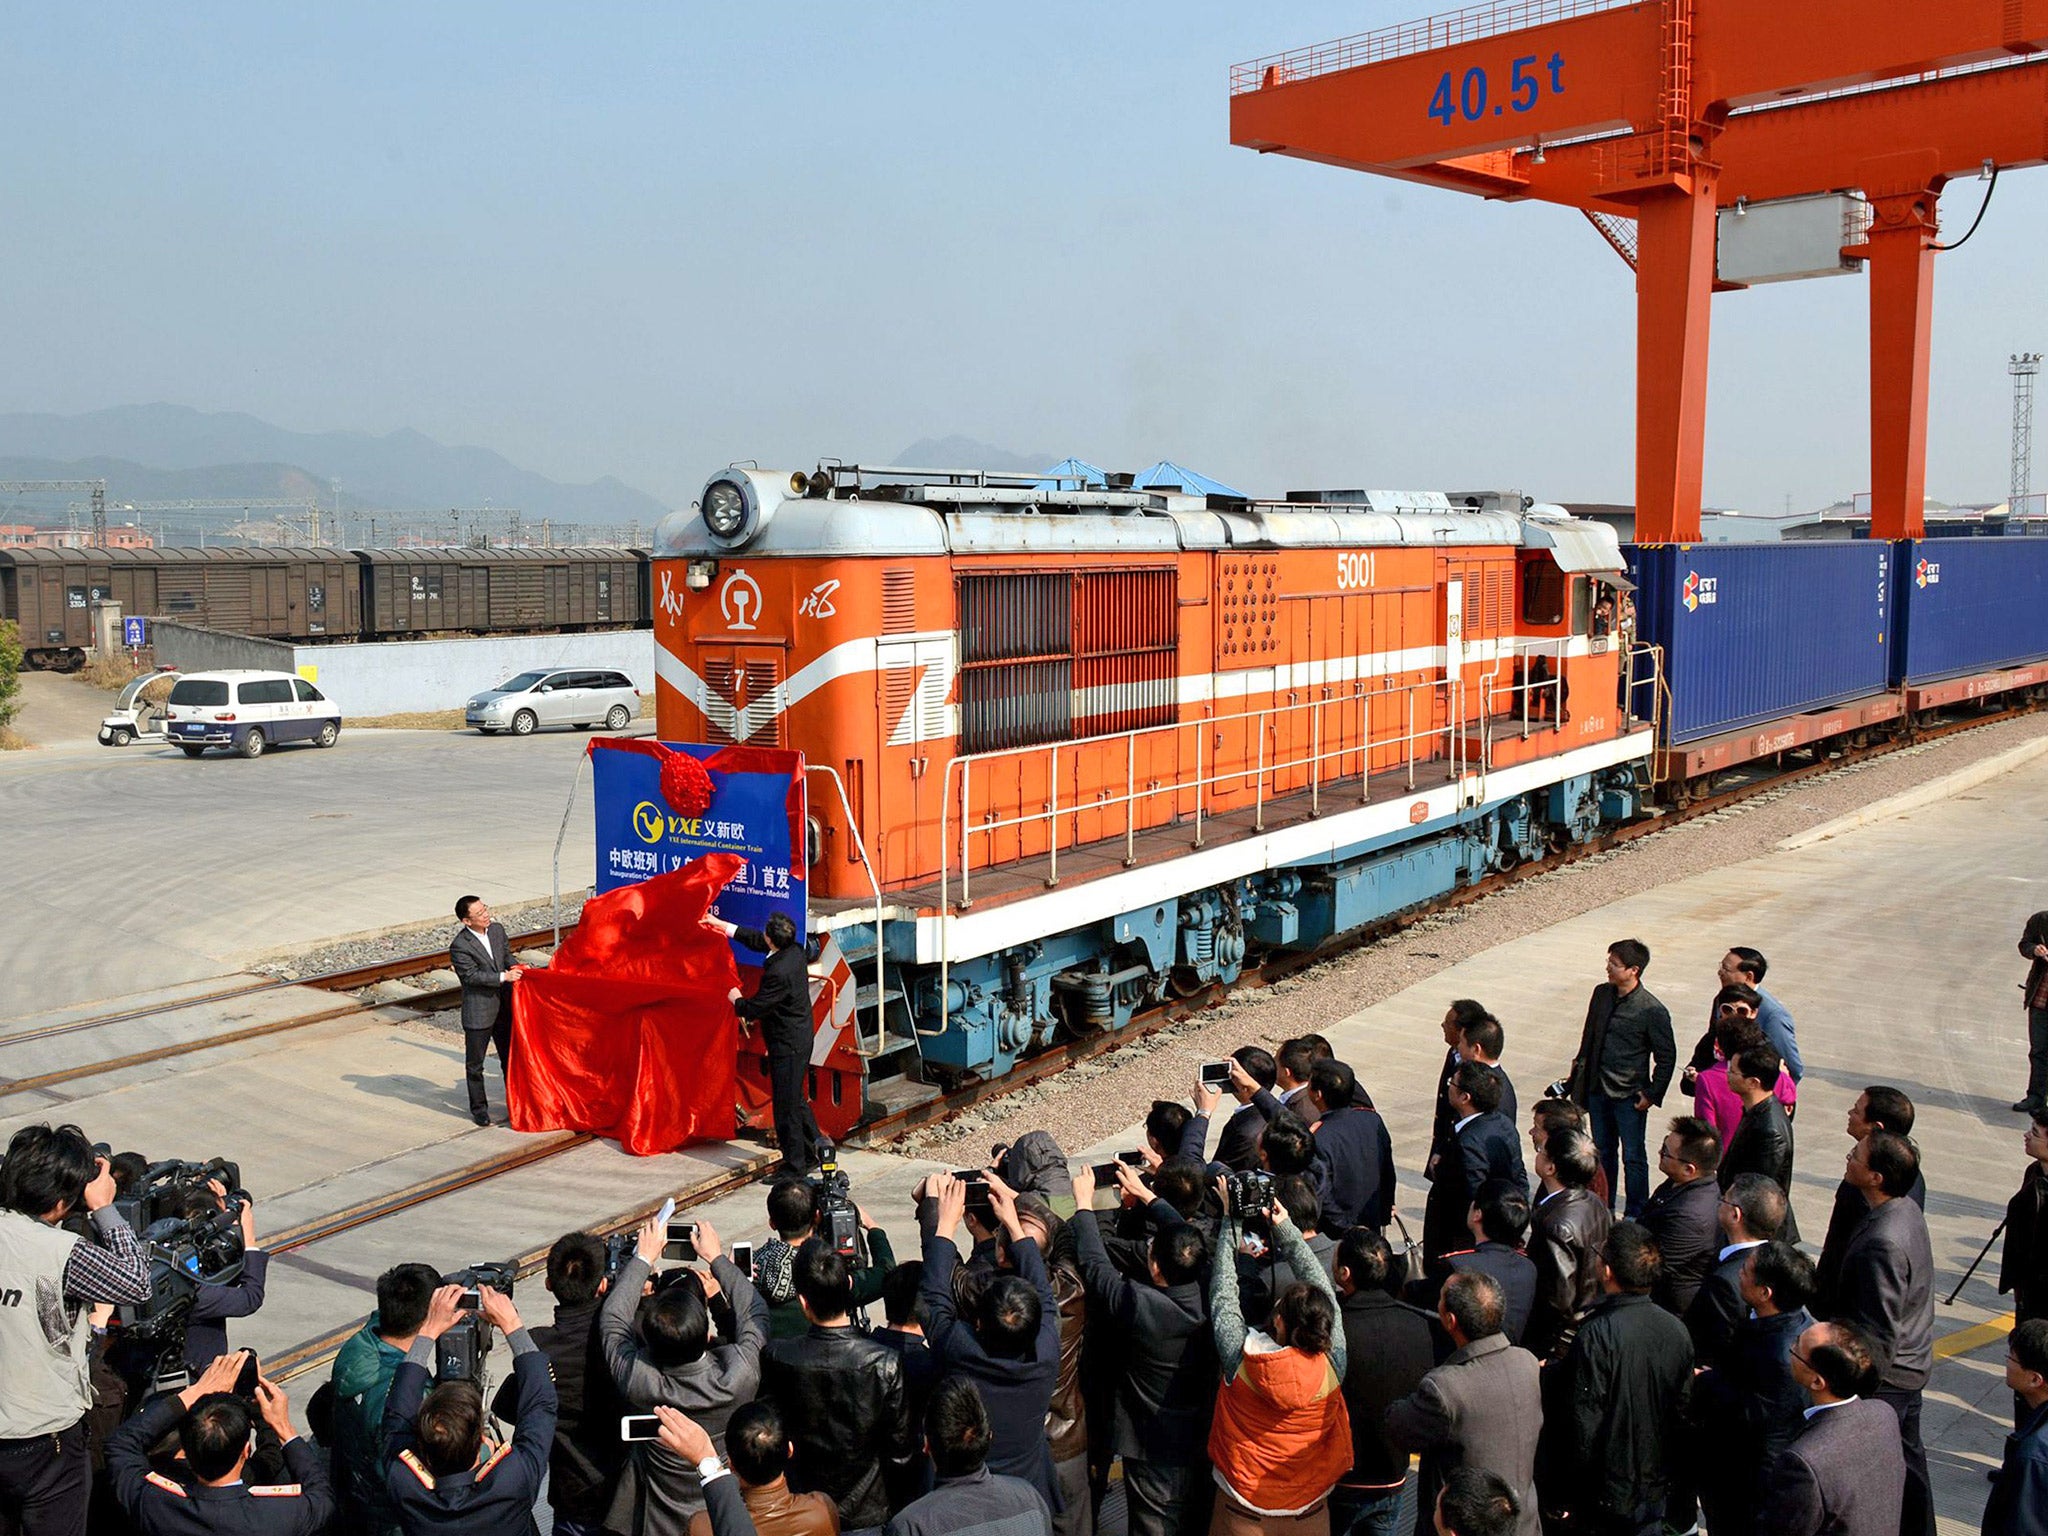 The China to Europe train was unveiled in Yiwu last November